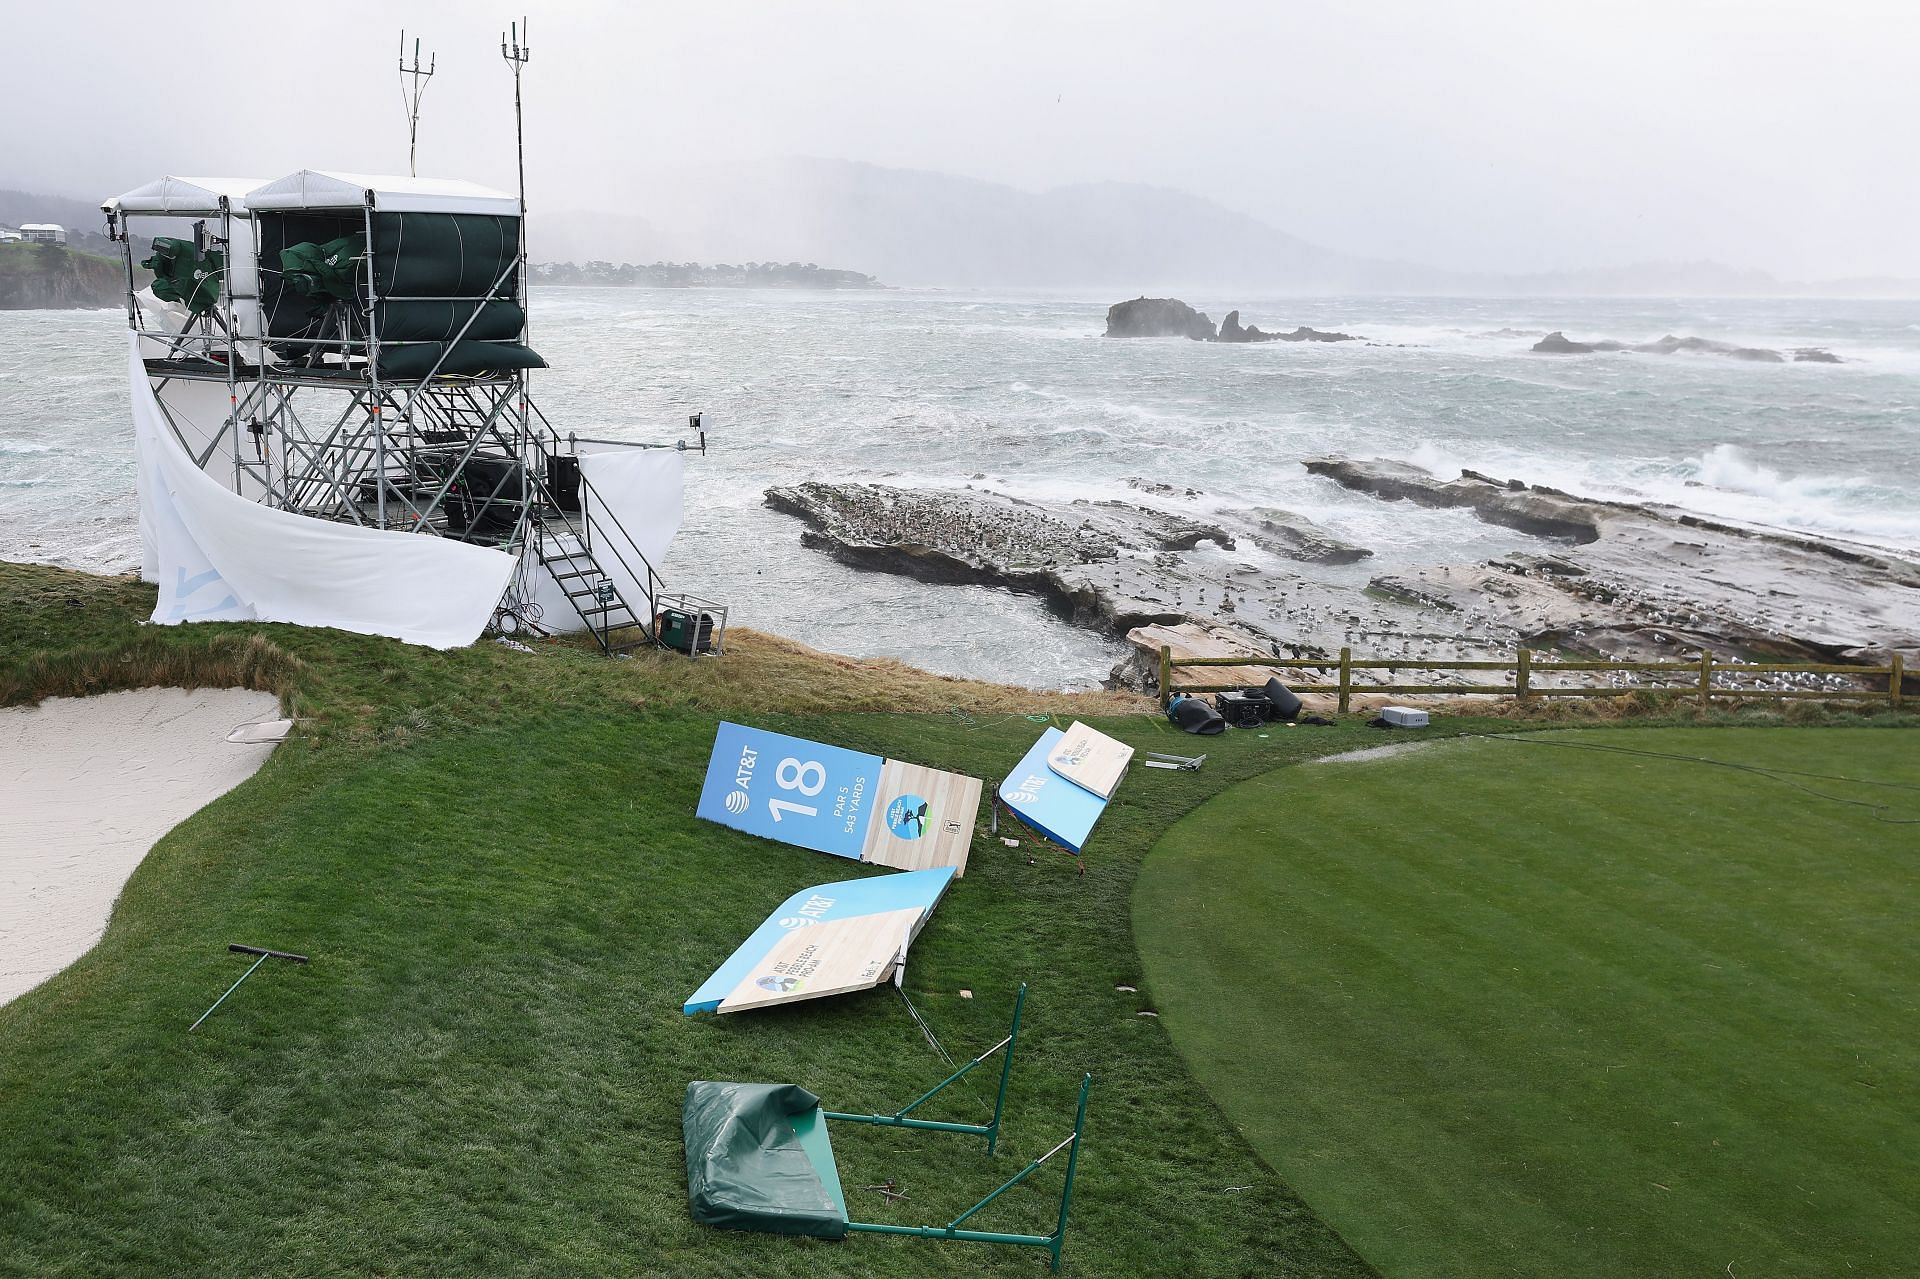 AT&amp;T Pebble Beach Pro-Am - Final Round